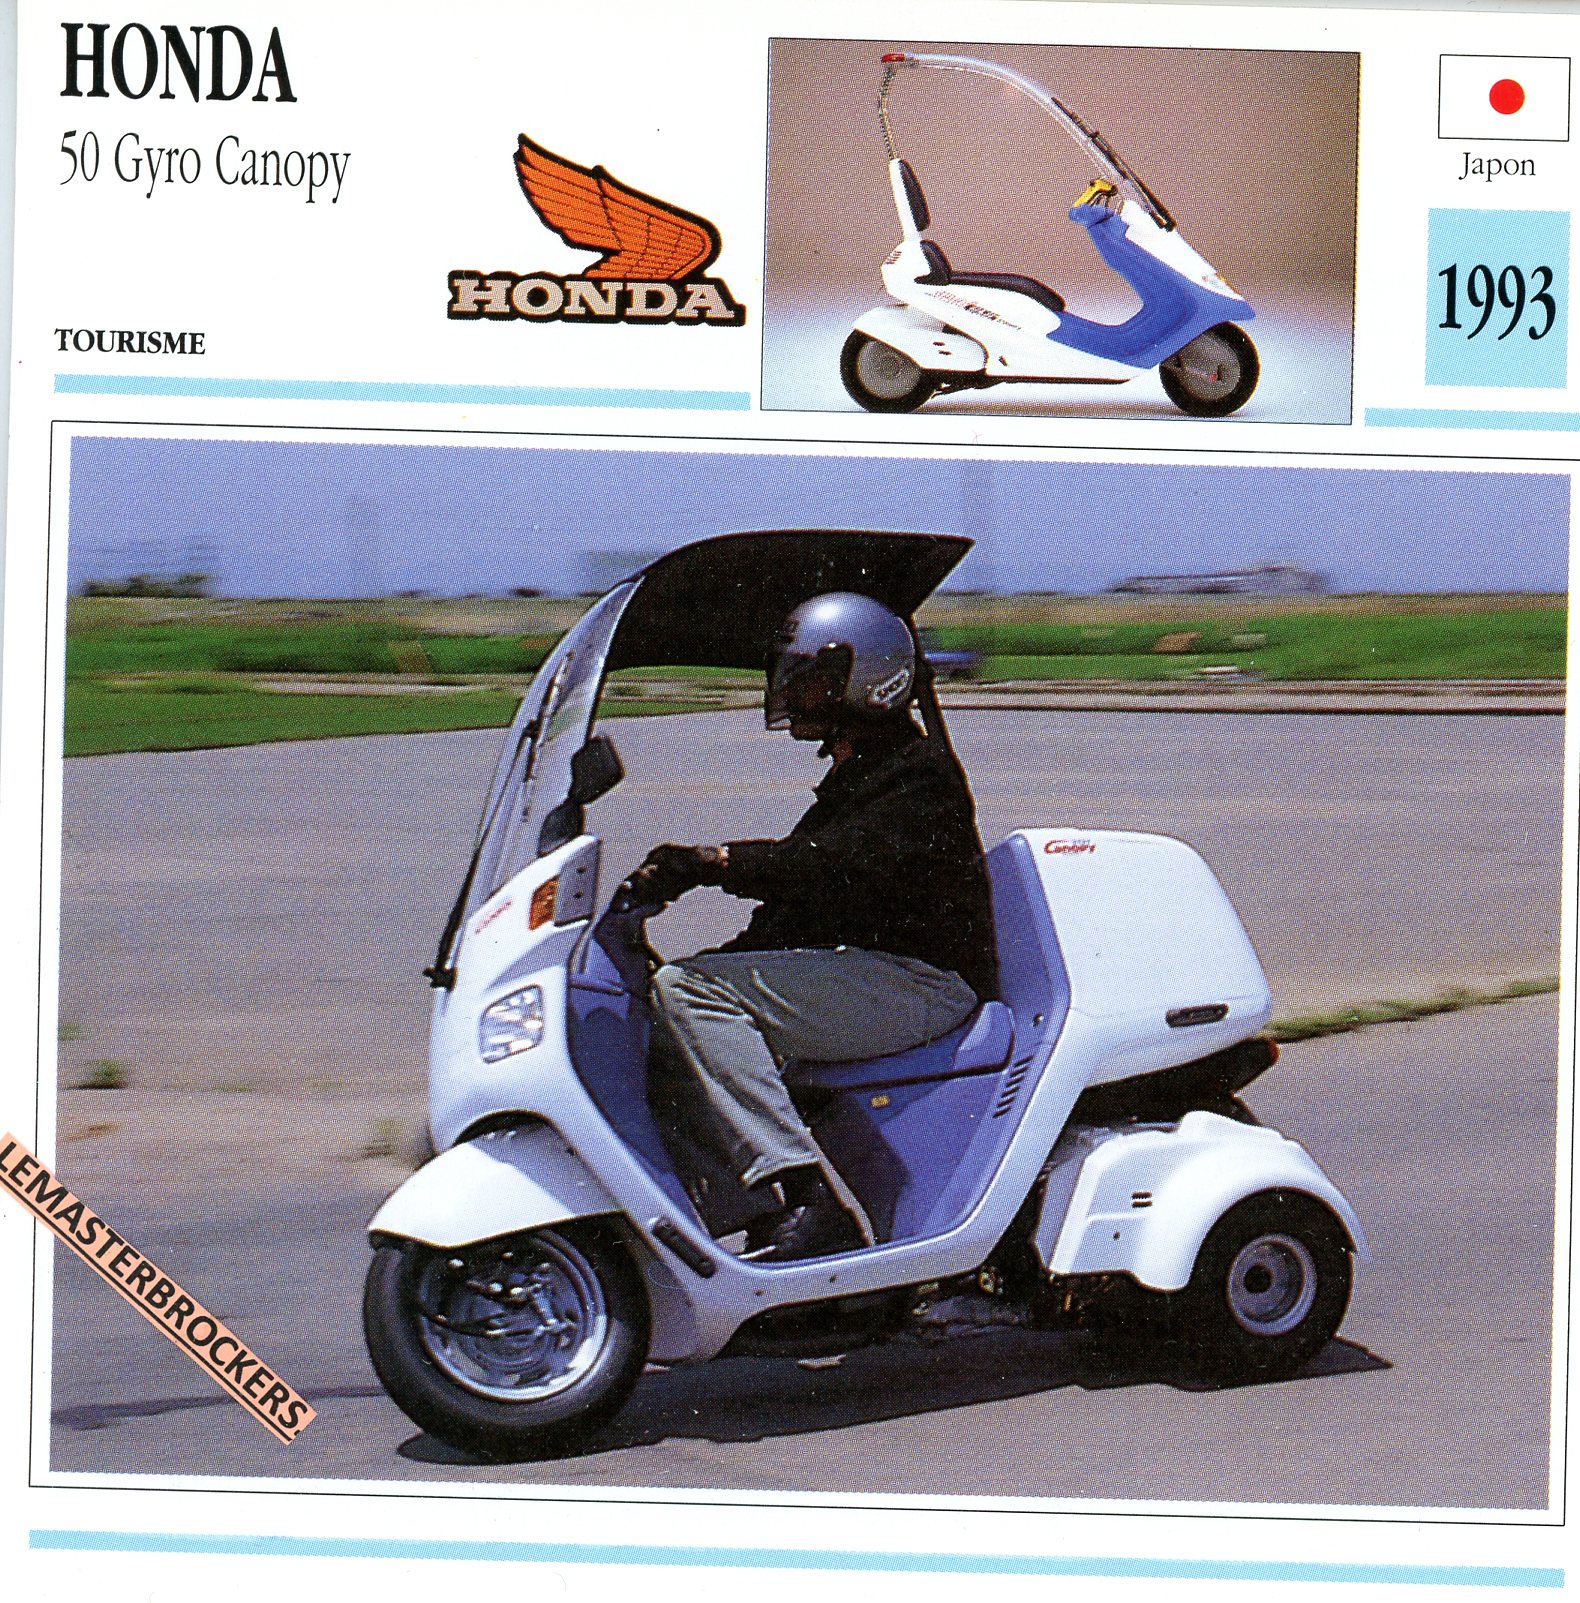 FICHE-SCOOTER-HONDA-50-GYRO-CANOPY-1993-LEMASTERBROCKERS-CARS-MOTORCYCLE